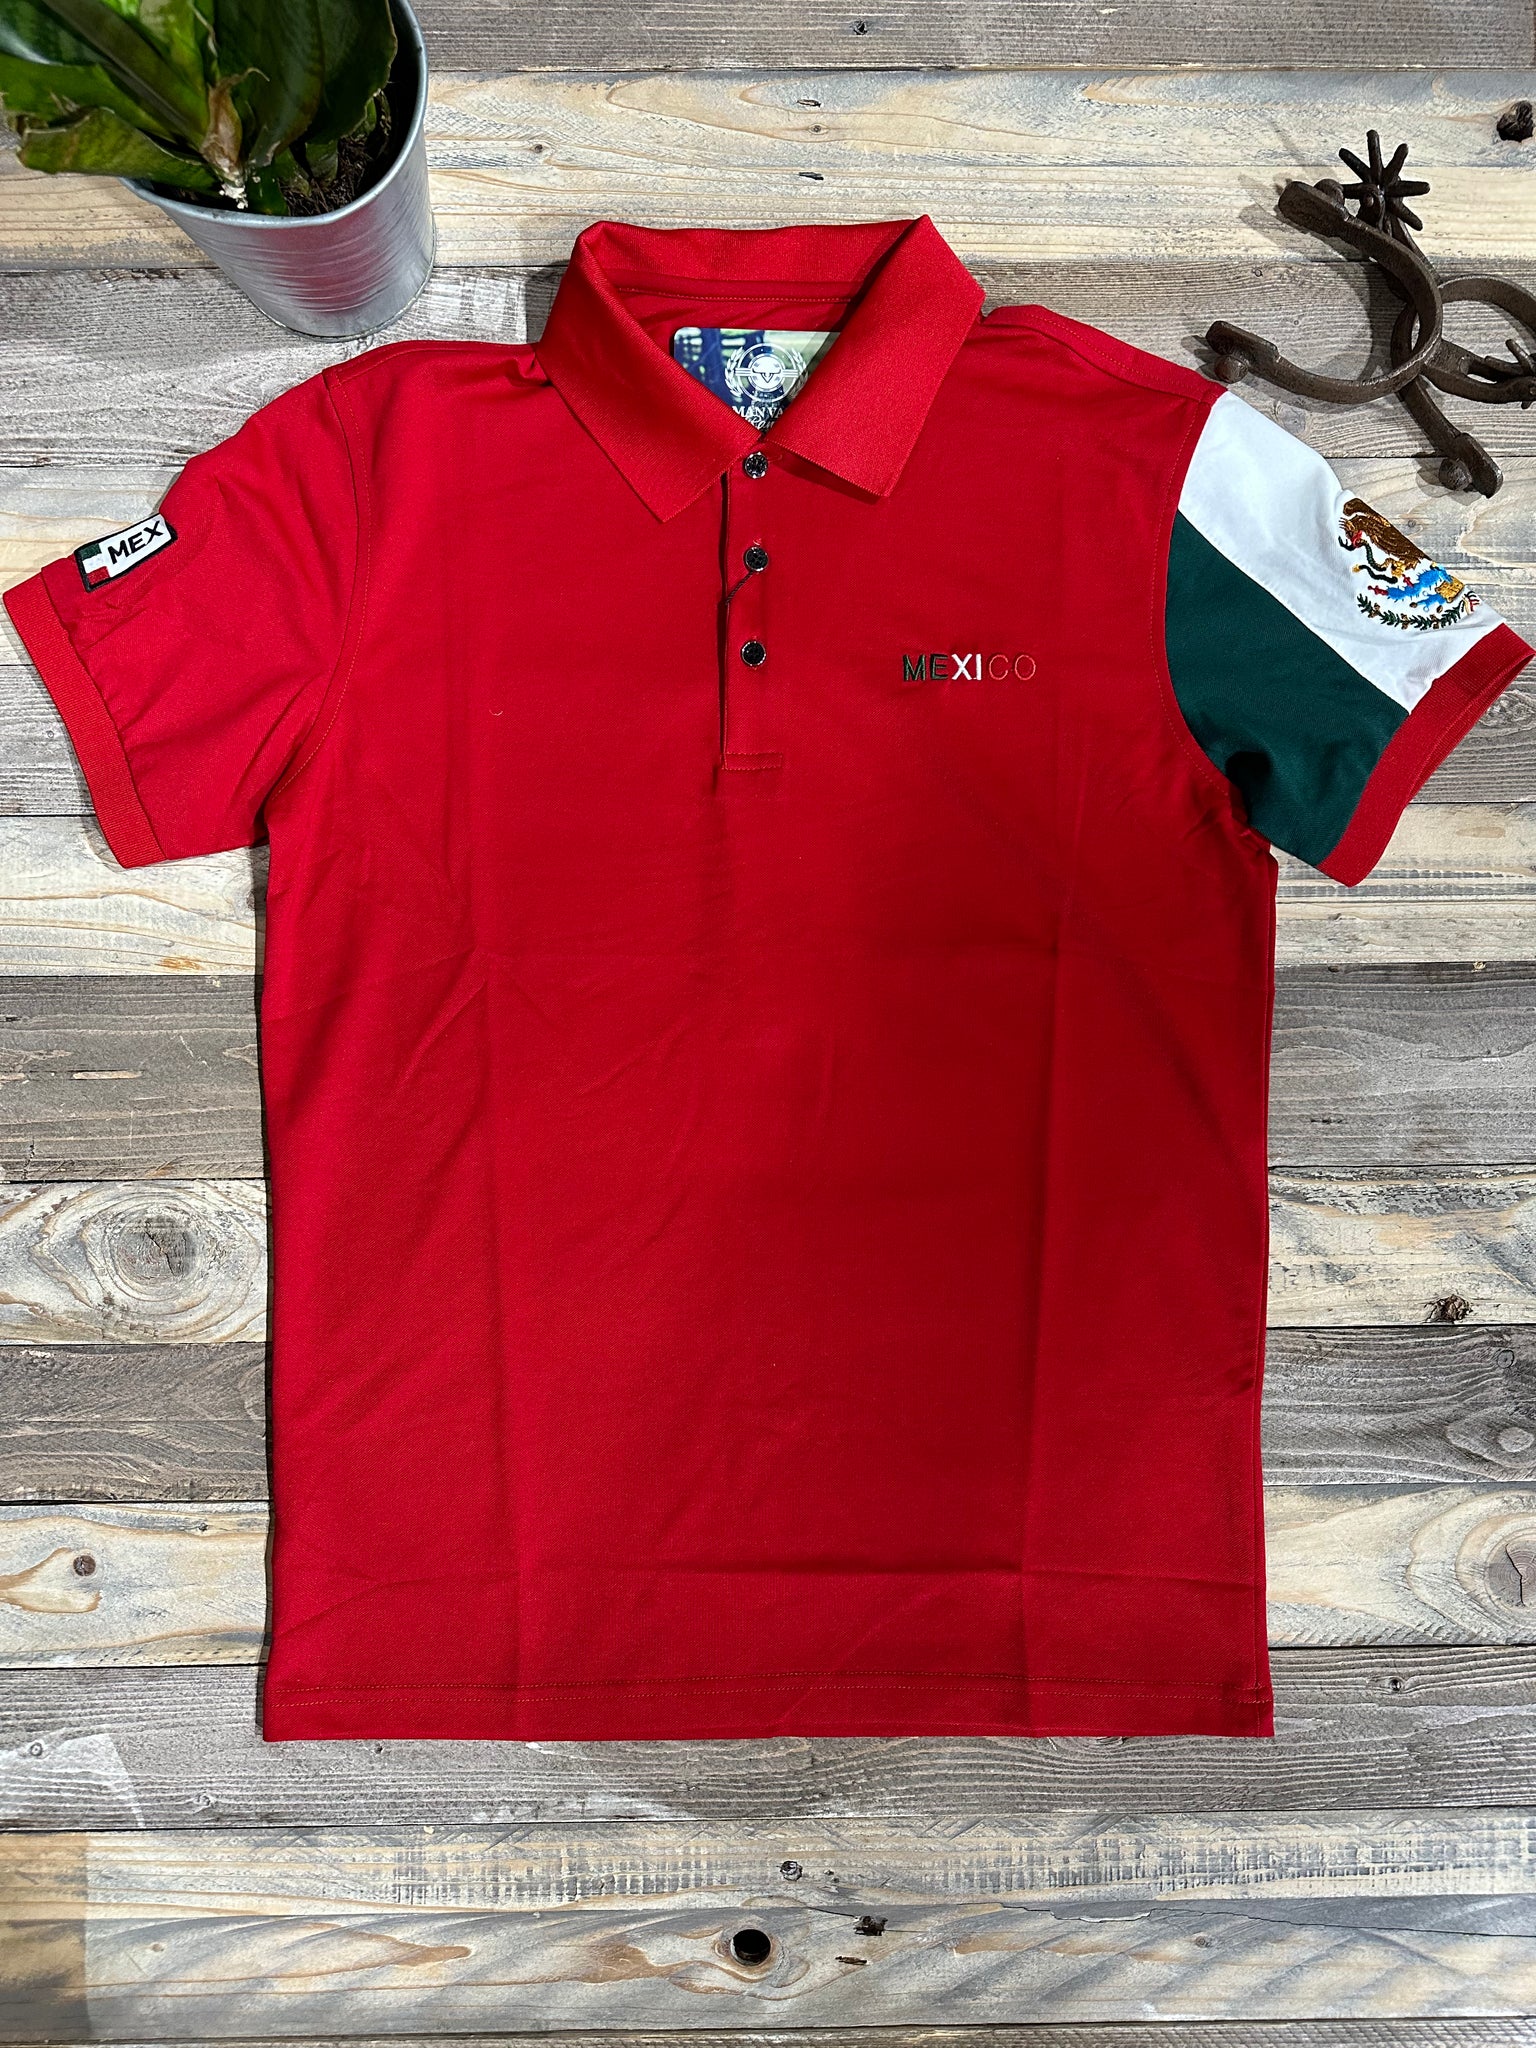 Team Mexico Red Embroidery Polo